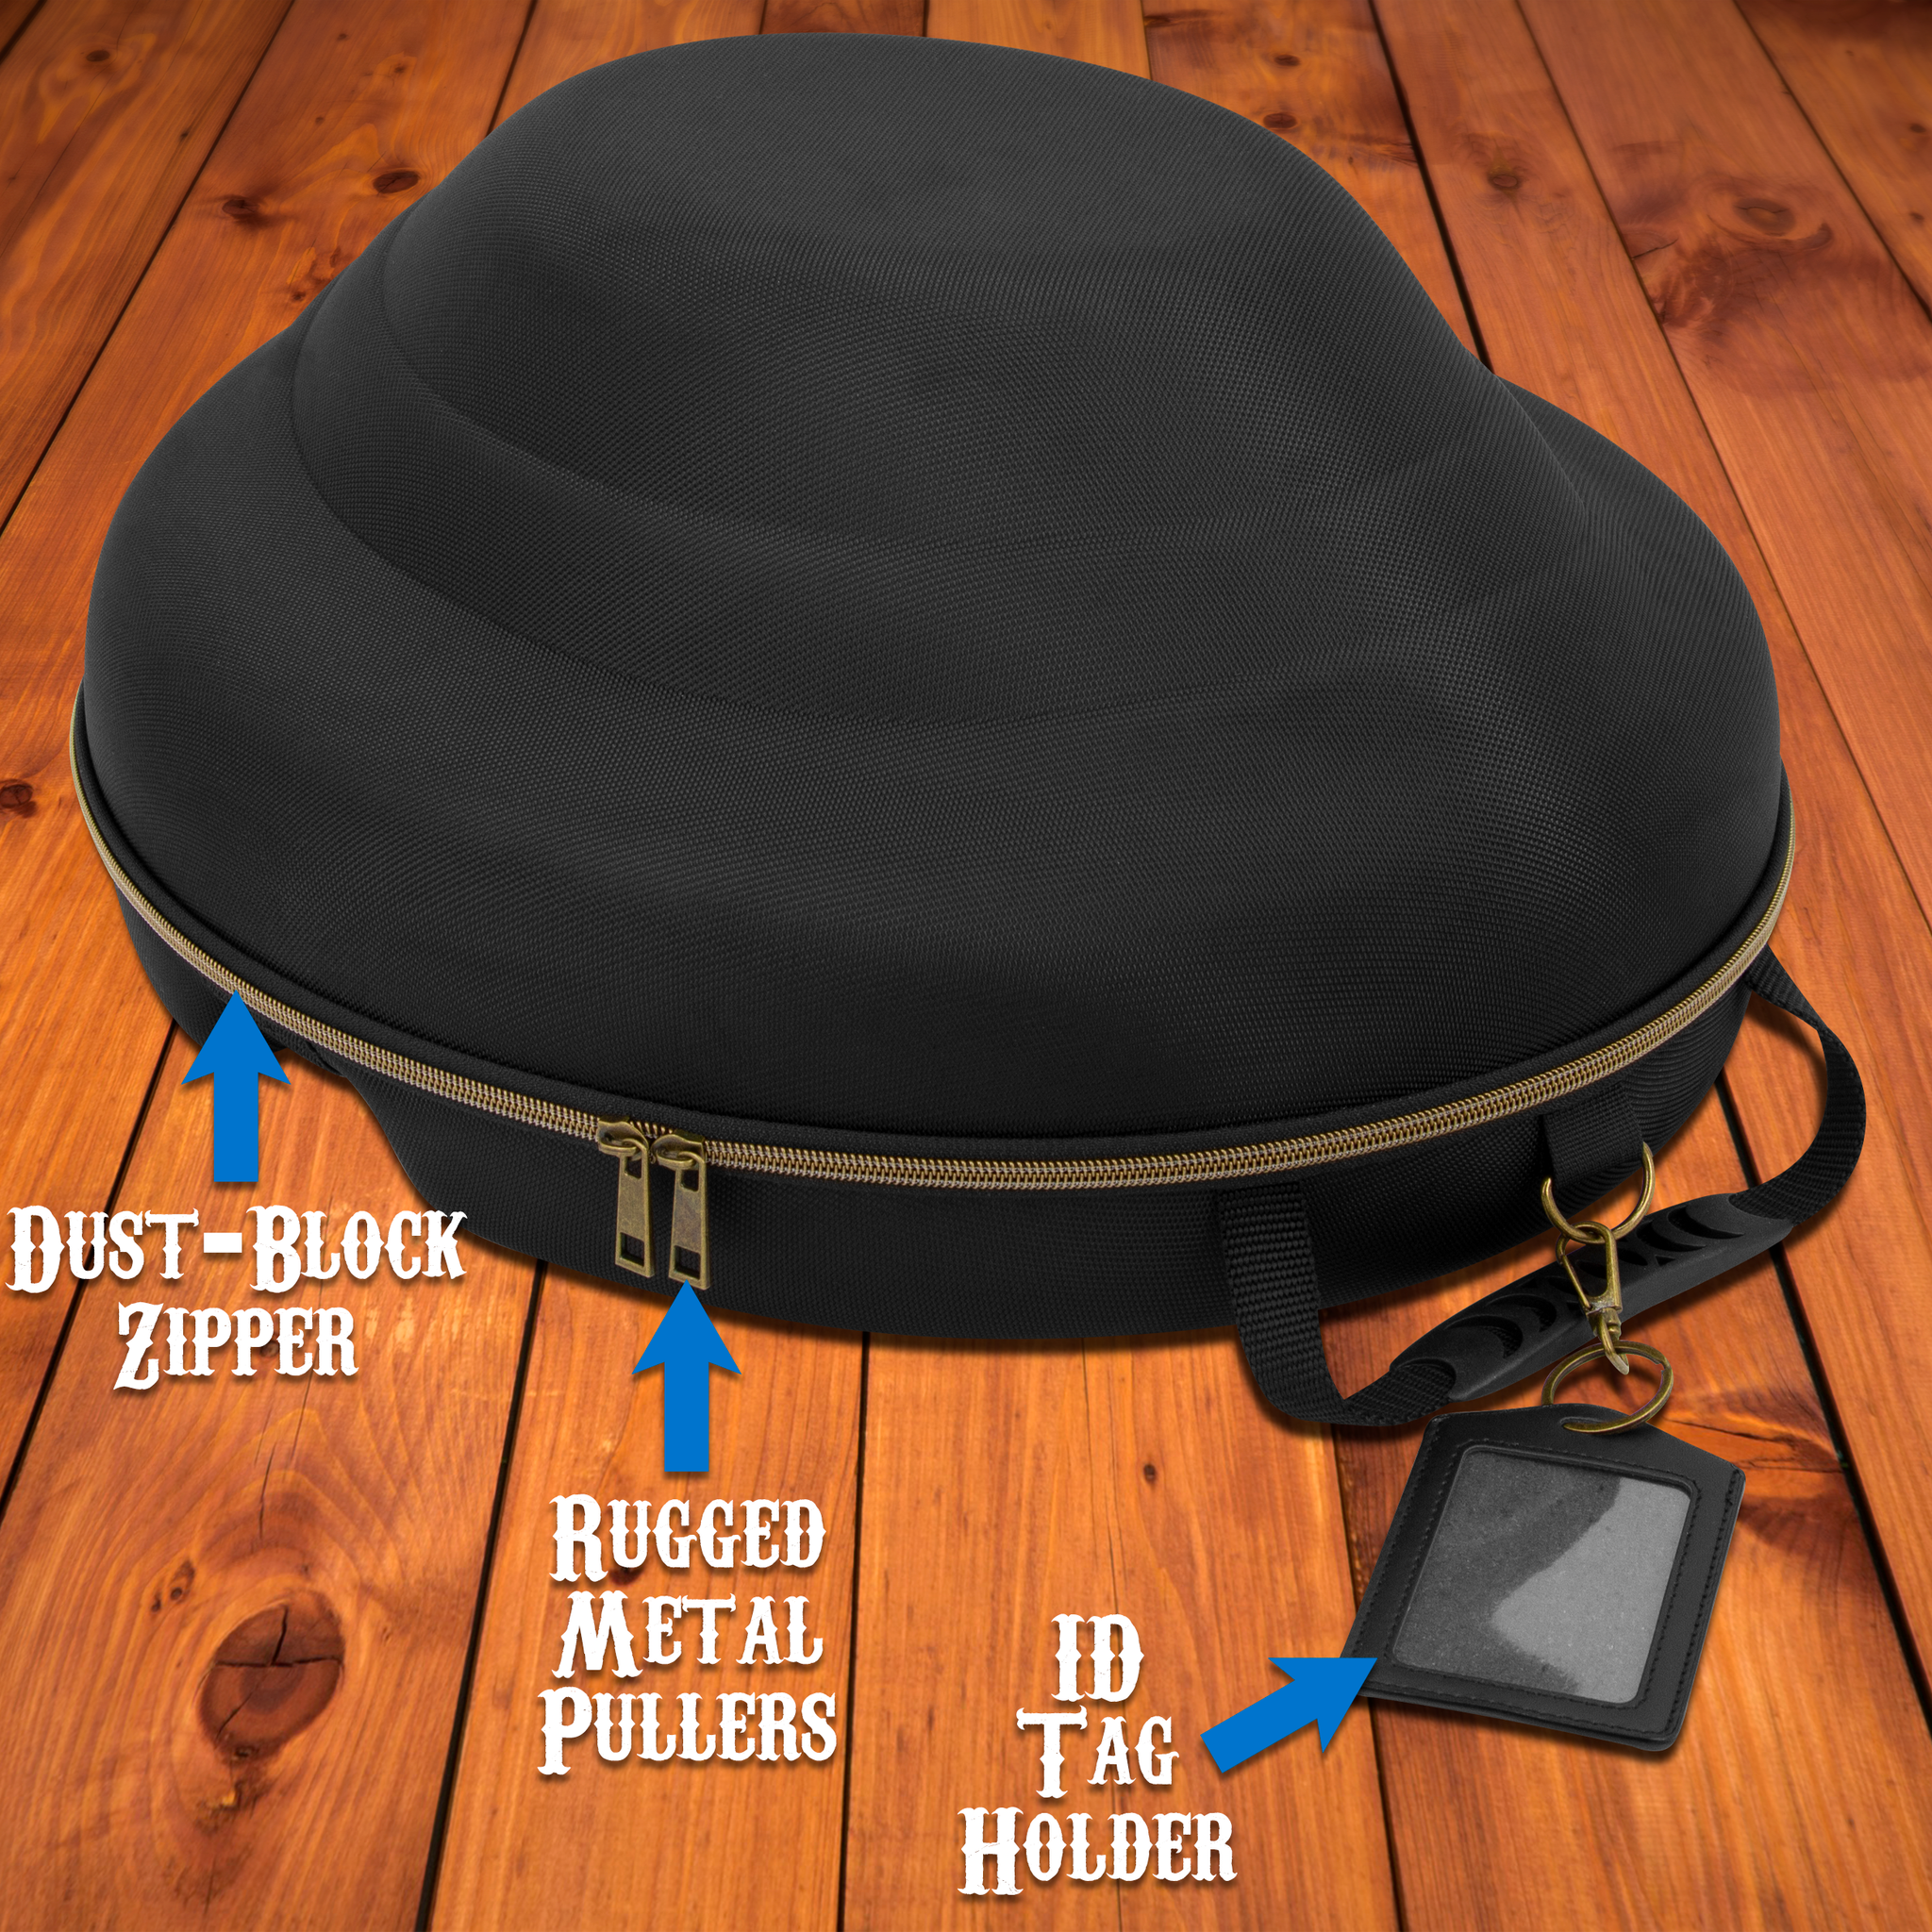 CASEMATIX Cowboy Hat Box Portable Cowboy Hat Storage for Brims Up To 4.75  - Hard Shell Hat Case with Adjustable Carry Strap, ID Slot and Foam Insert